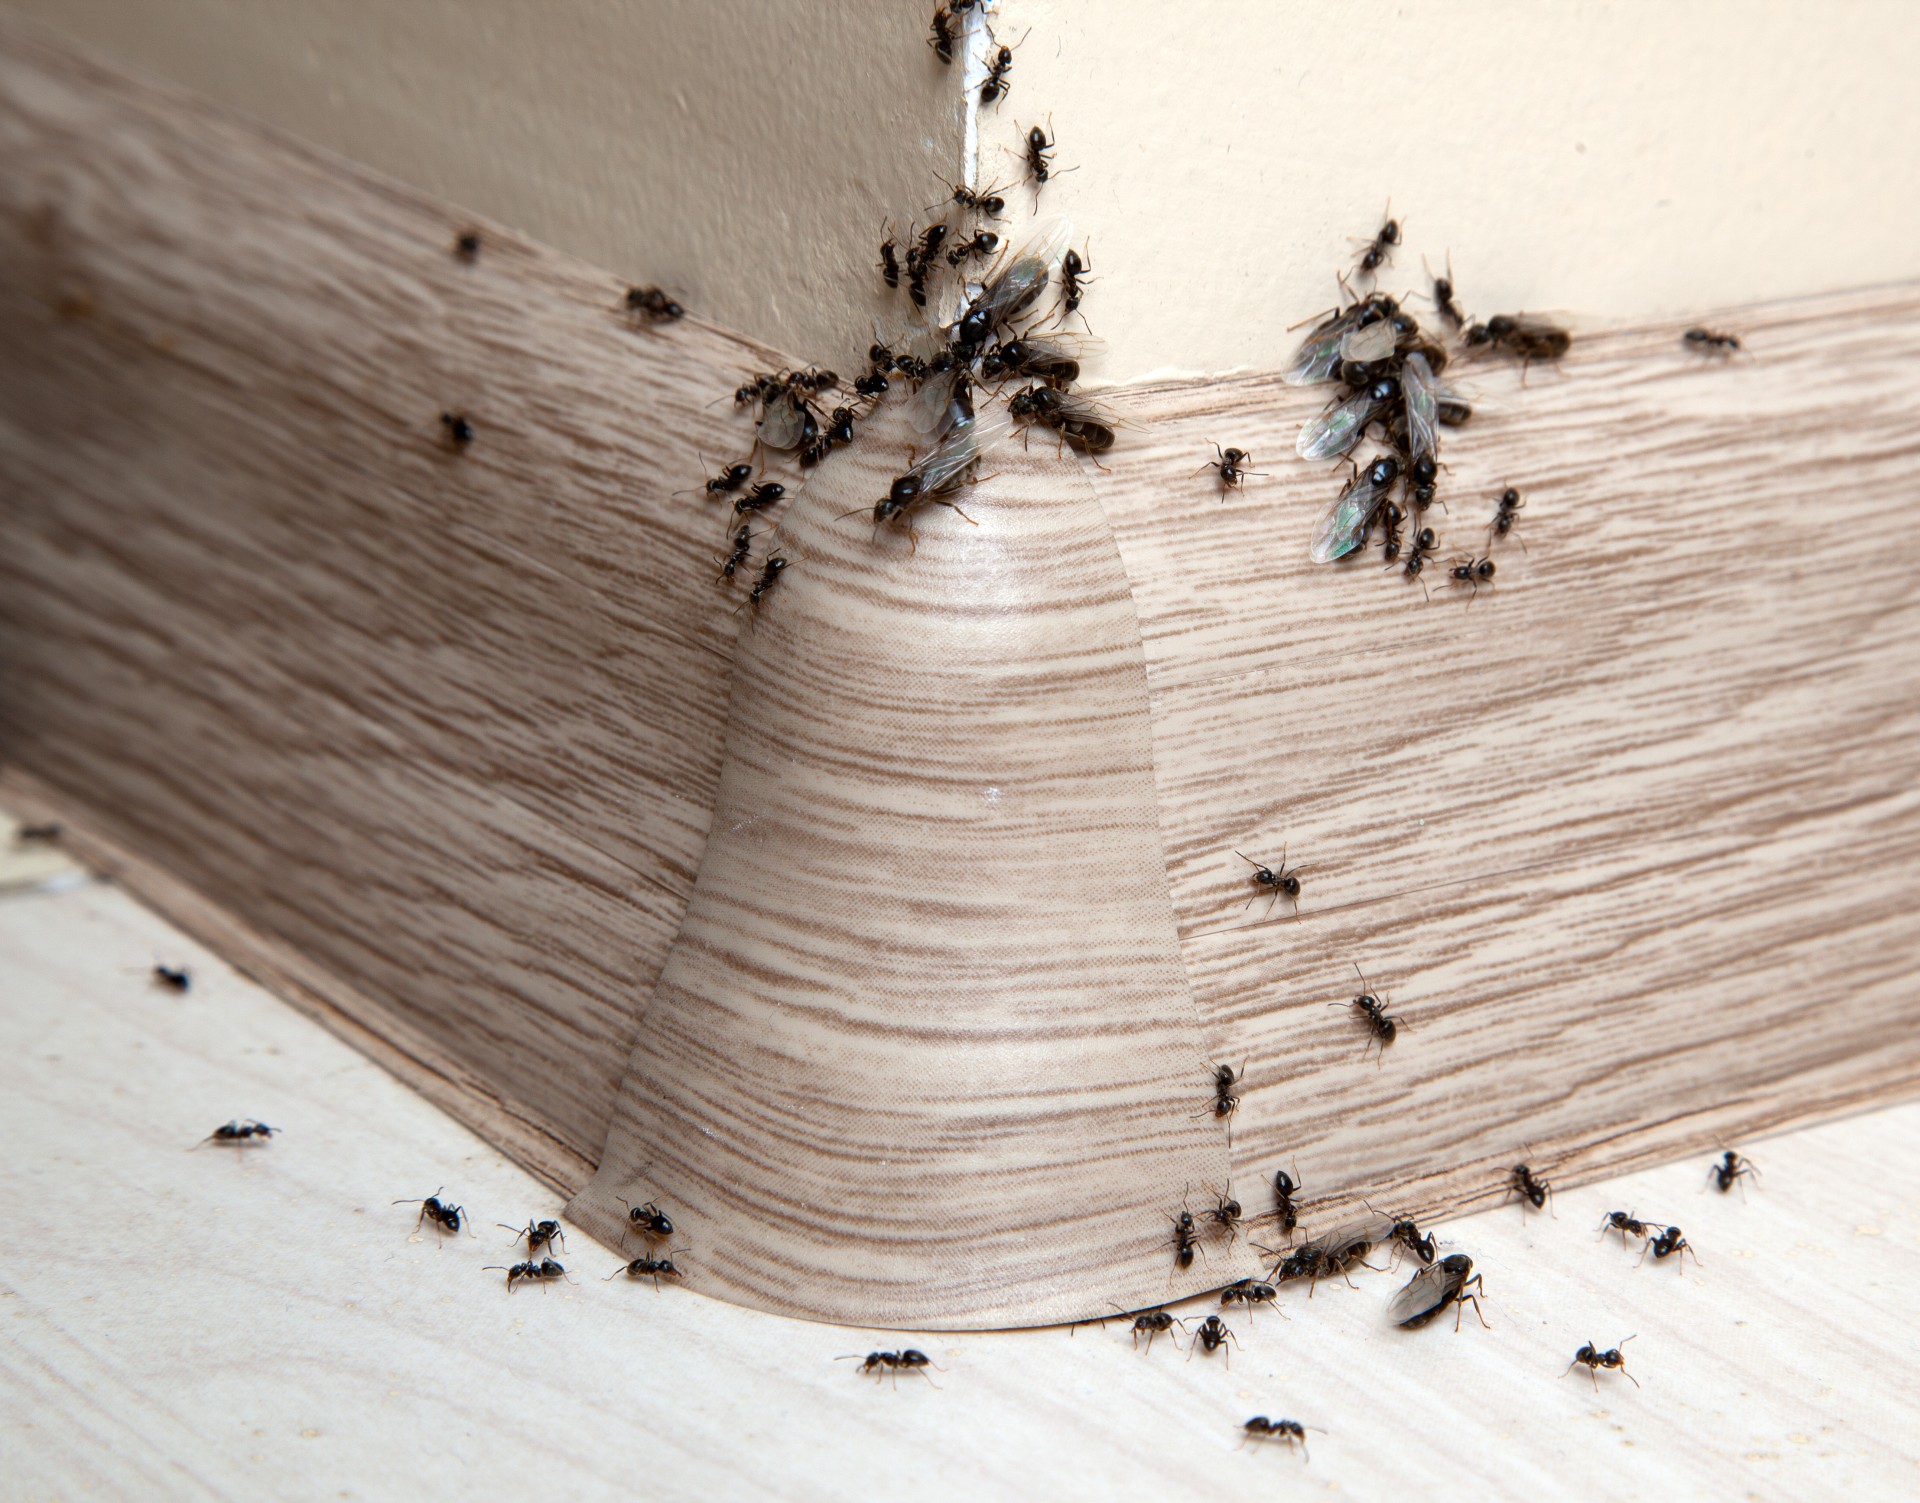 Ant Infestation, Pest Control in Esher, Claygate, KT10. Call Now 020 8166 9746